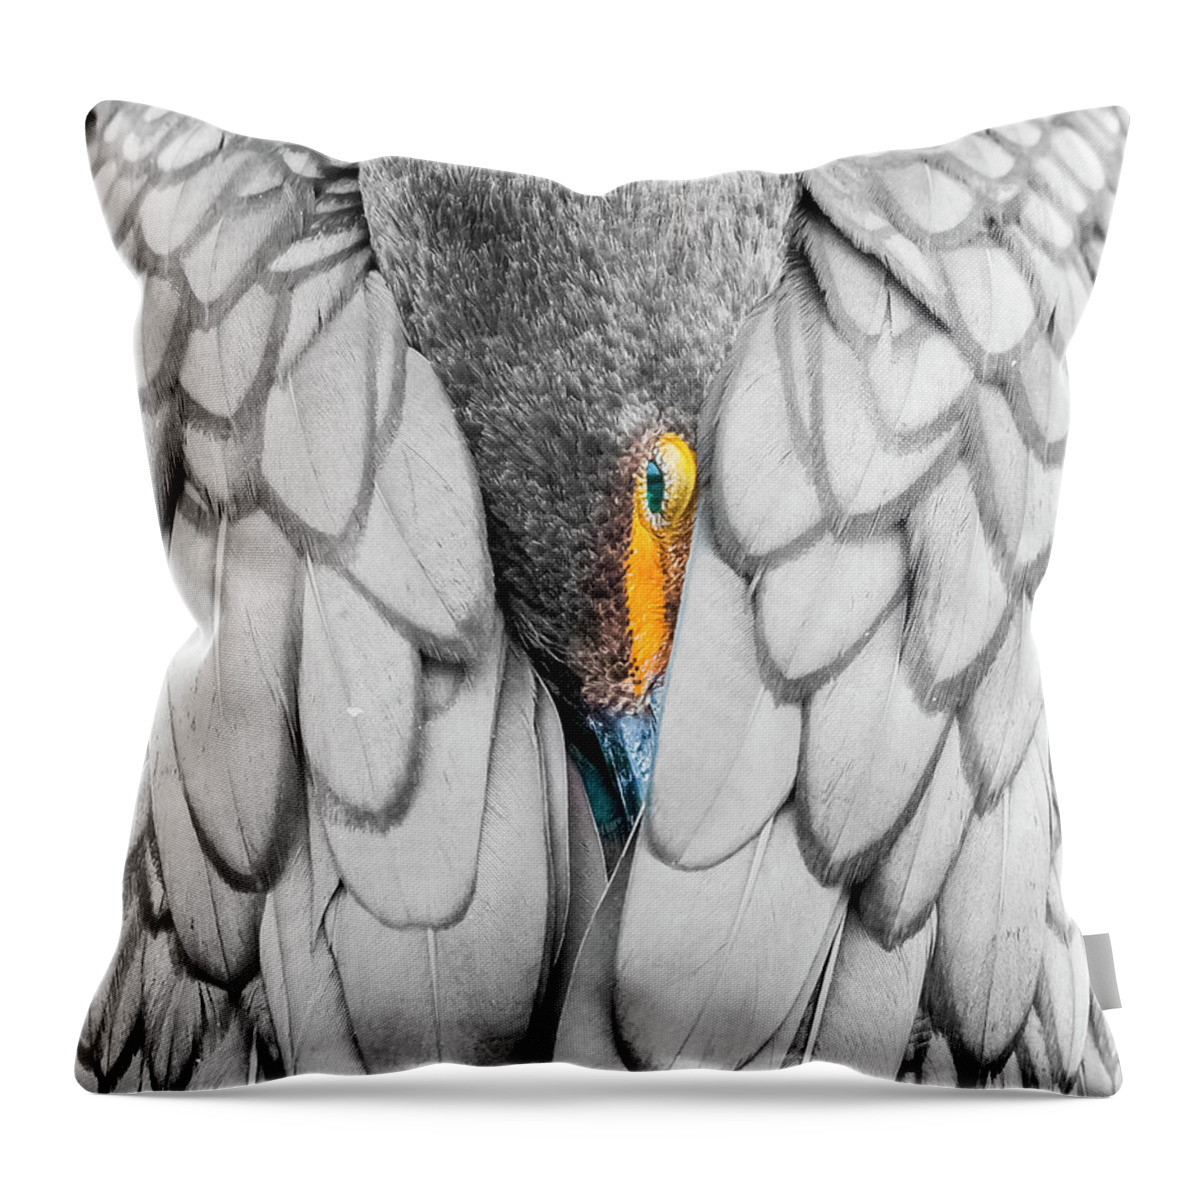  Throw Pillow featuring the photograph Keeping warm. by Usha Peddamatham